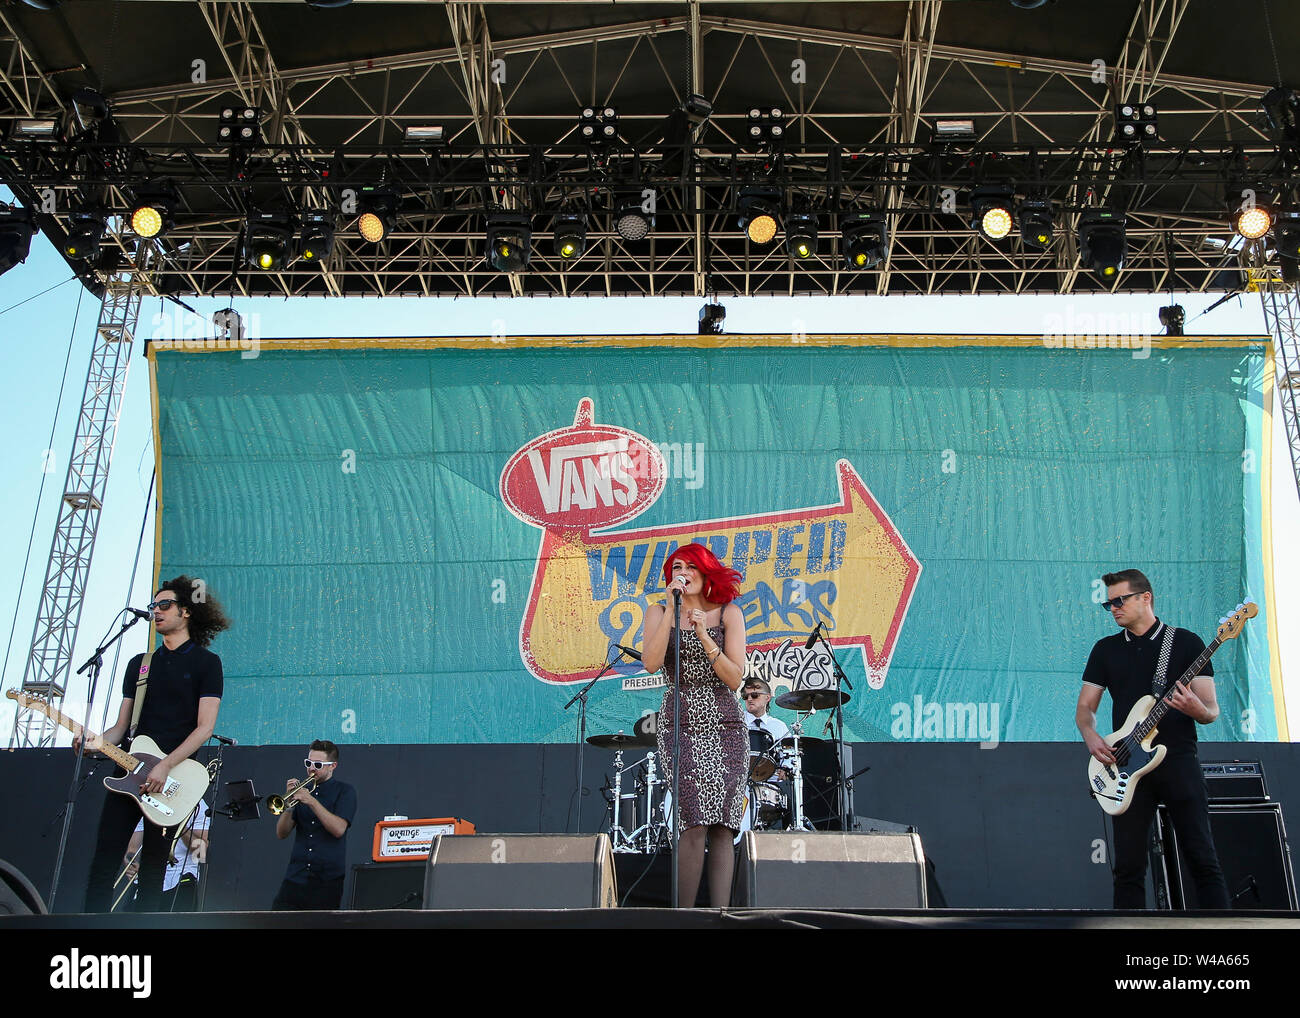 California, USA . 20th July, 2019. Save Ferris performs during the Vans  Warped Tour 25th Anniversary at Shoreline Amphitheater on July 20, 2019 in  Mountain View, California. Credit: MediaPunch Inc/Alamy Live News